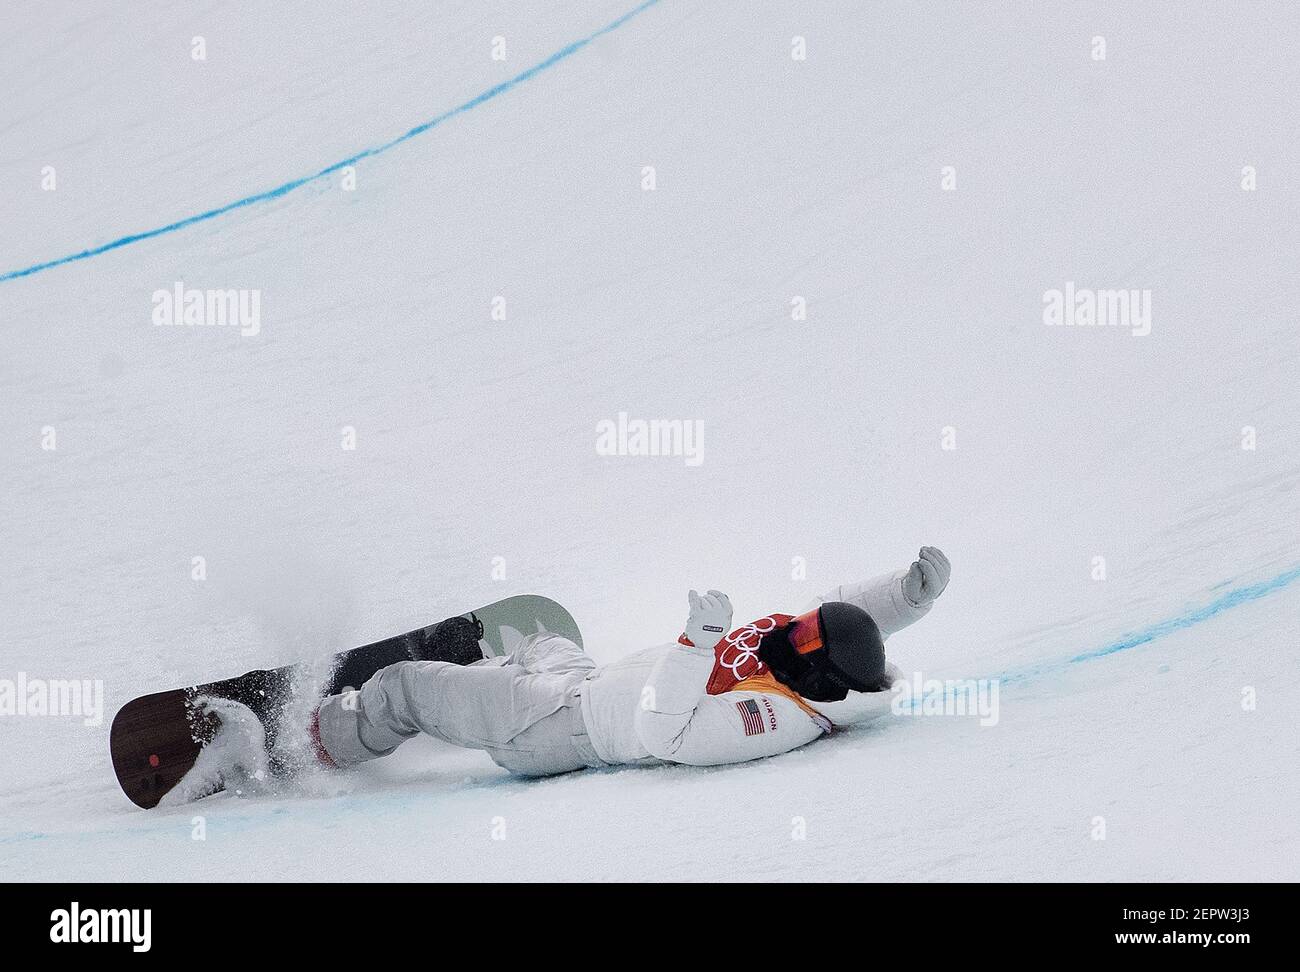 Shaun White fell during his second run in the Men's Half Pipe Snowboard finals at Phoenix Park in South Korea on Wednesday, Feb. 14, 2018, during the Pyeongchang Winter Olympics. (Photo by Carlos Gonzalez/Minneapolis Star Tribune/TNS/Sipa USA) Stock Photo